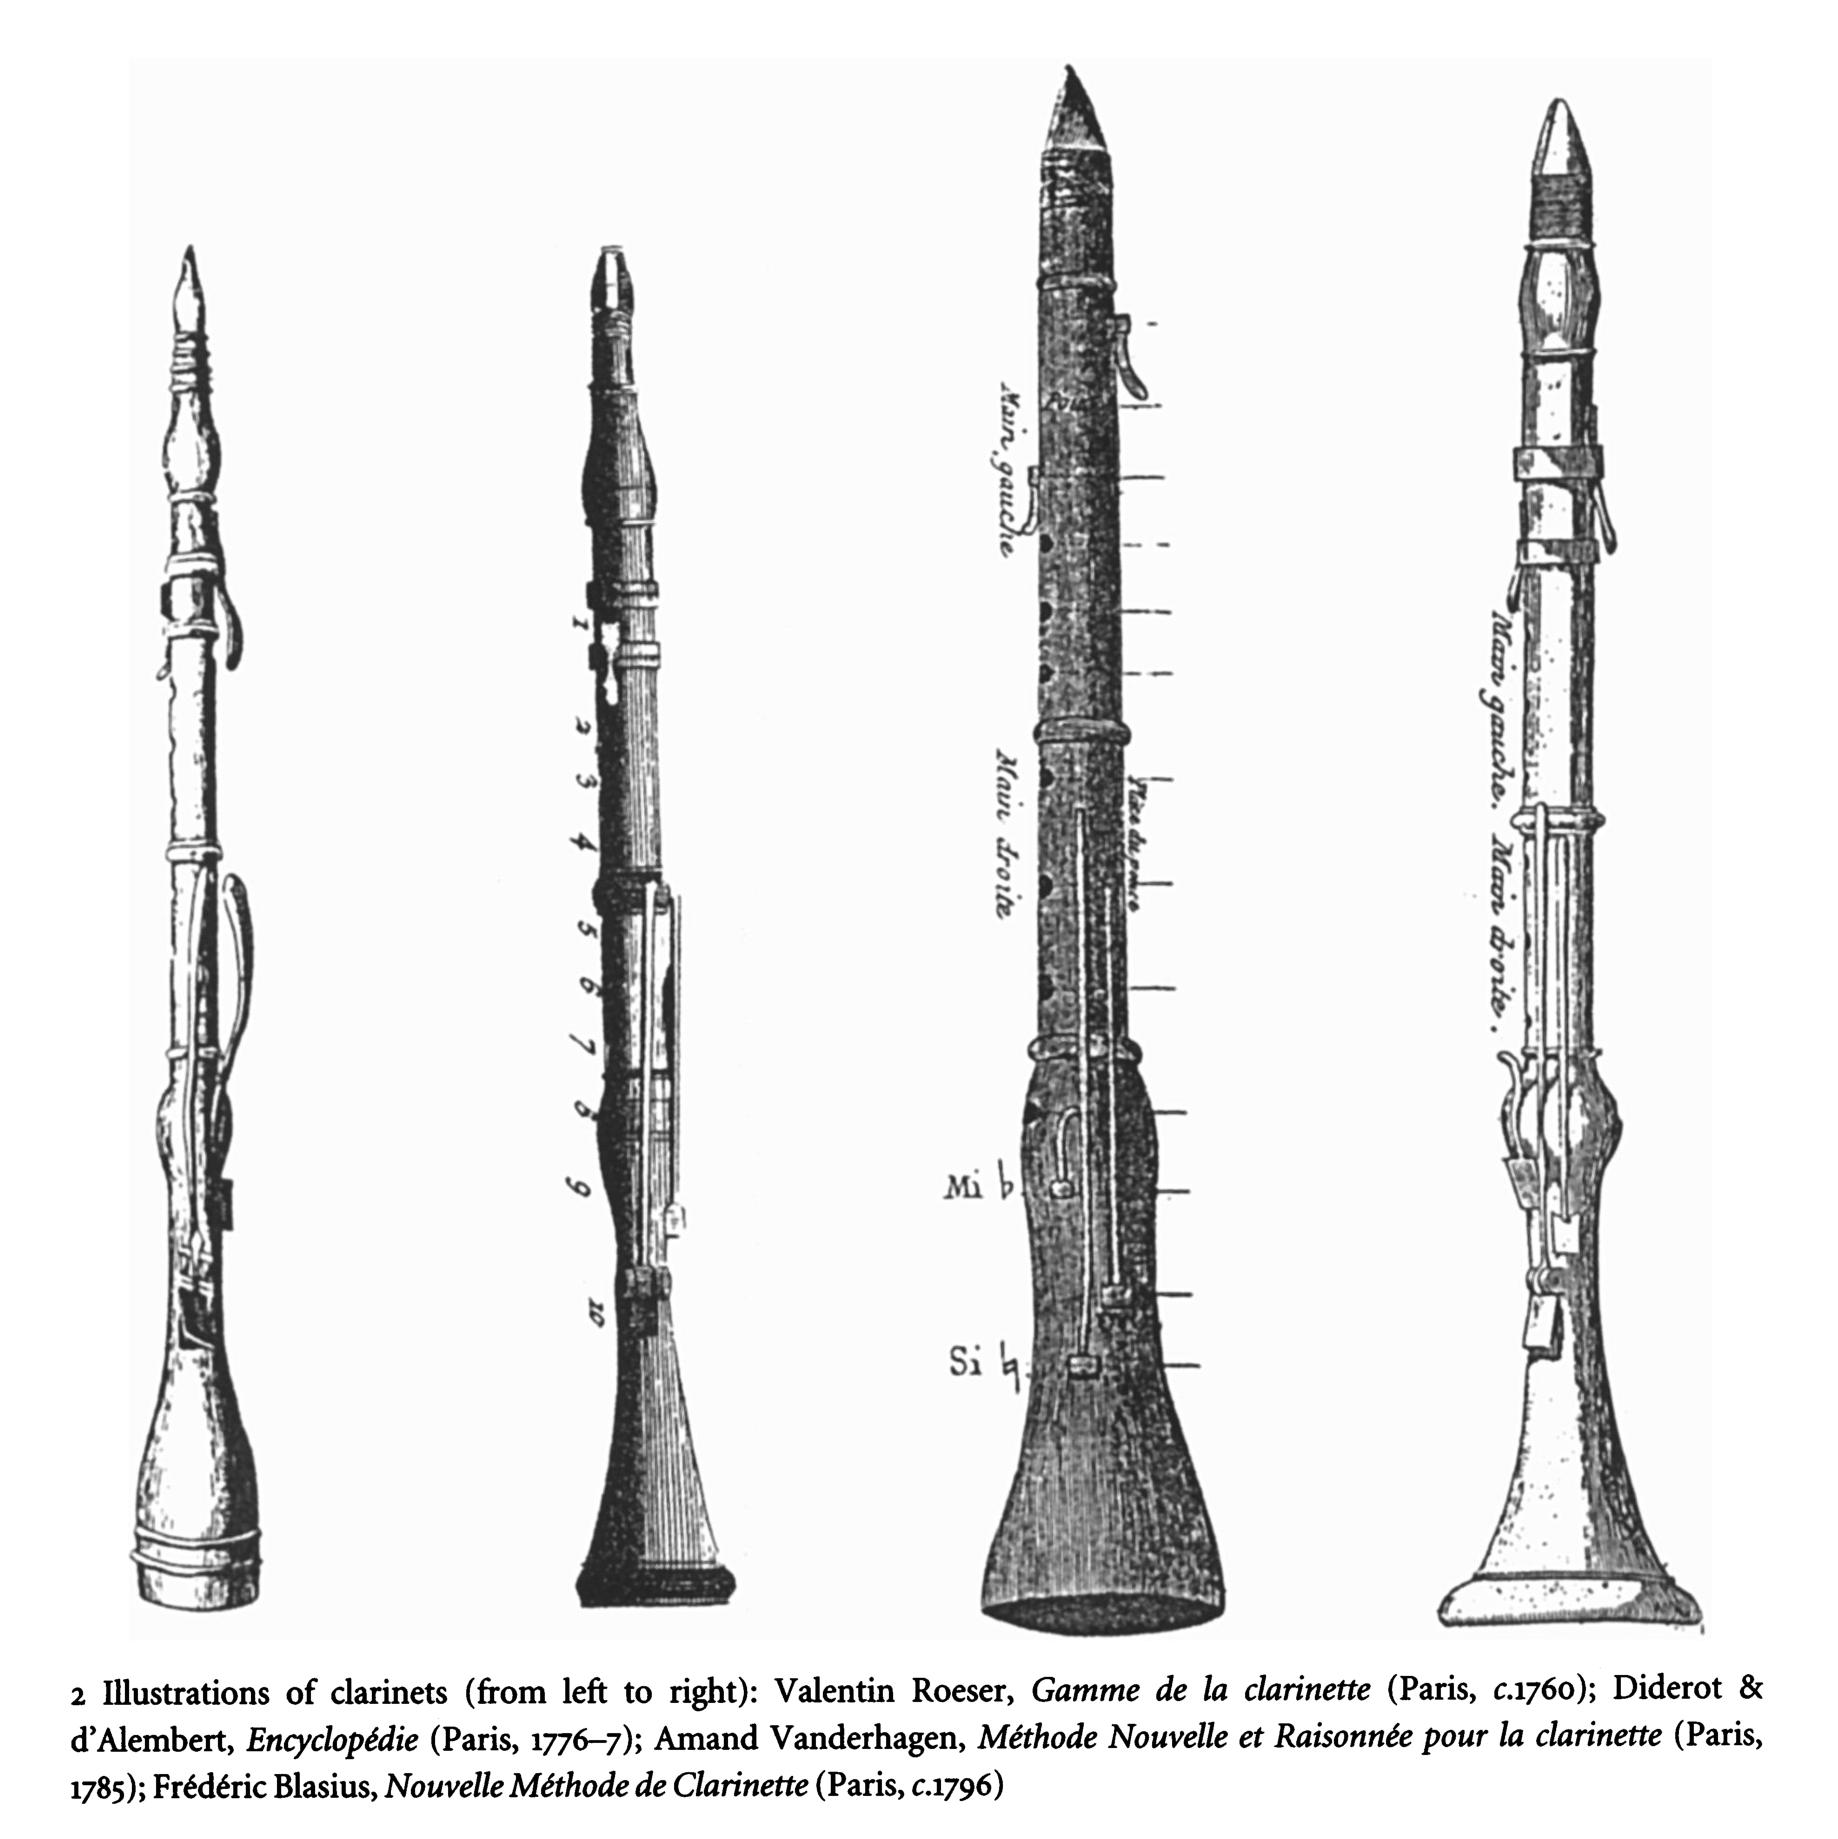 Eric Hoeprich, Illustration of instruments